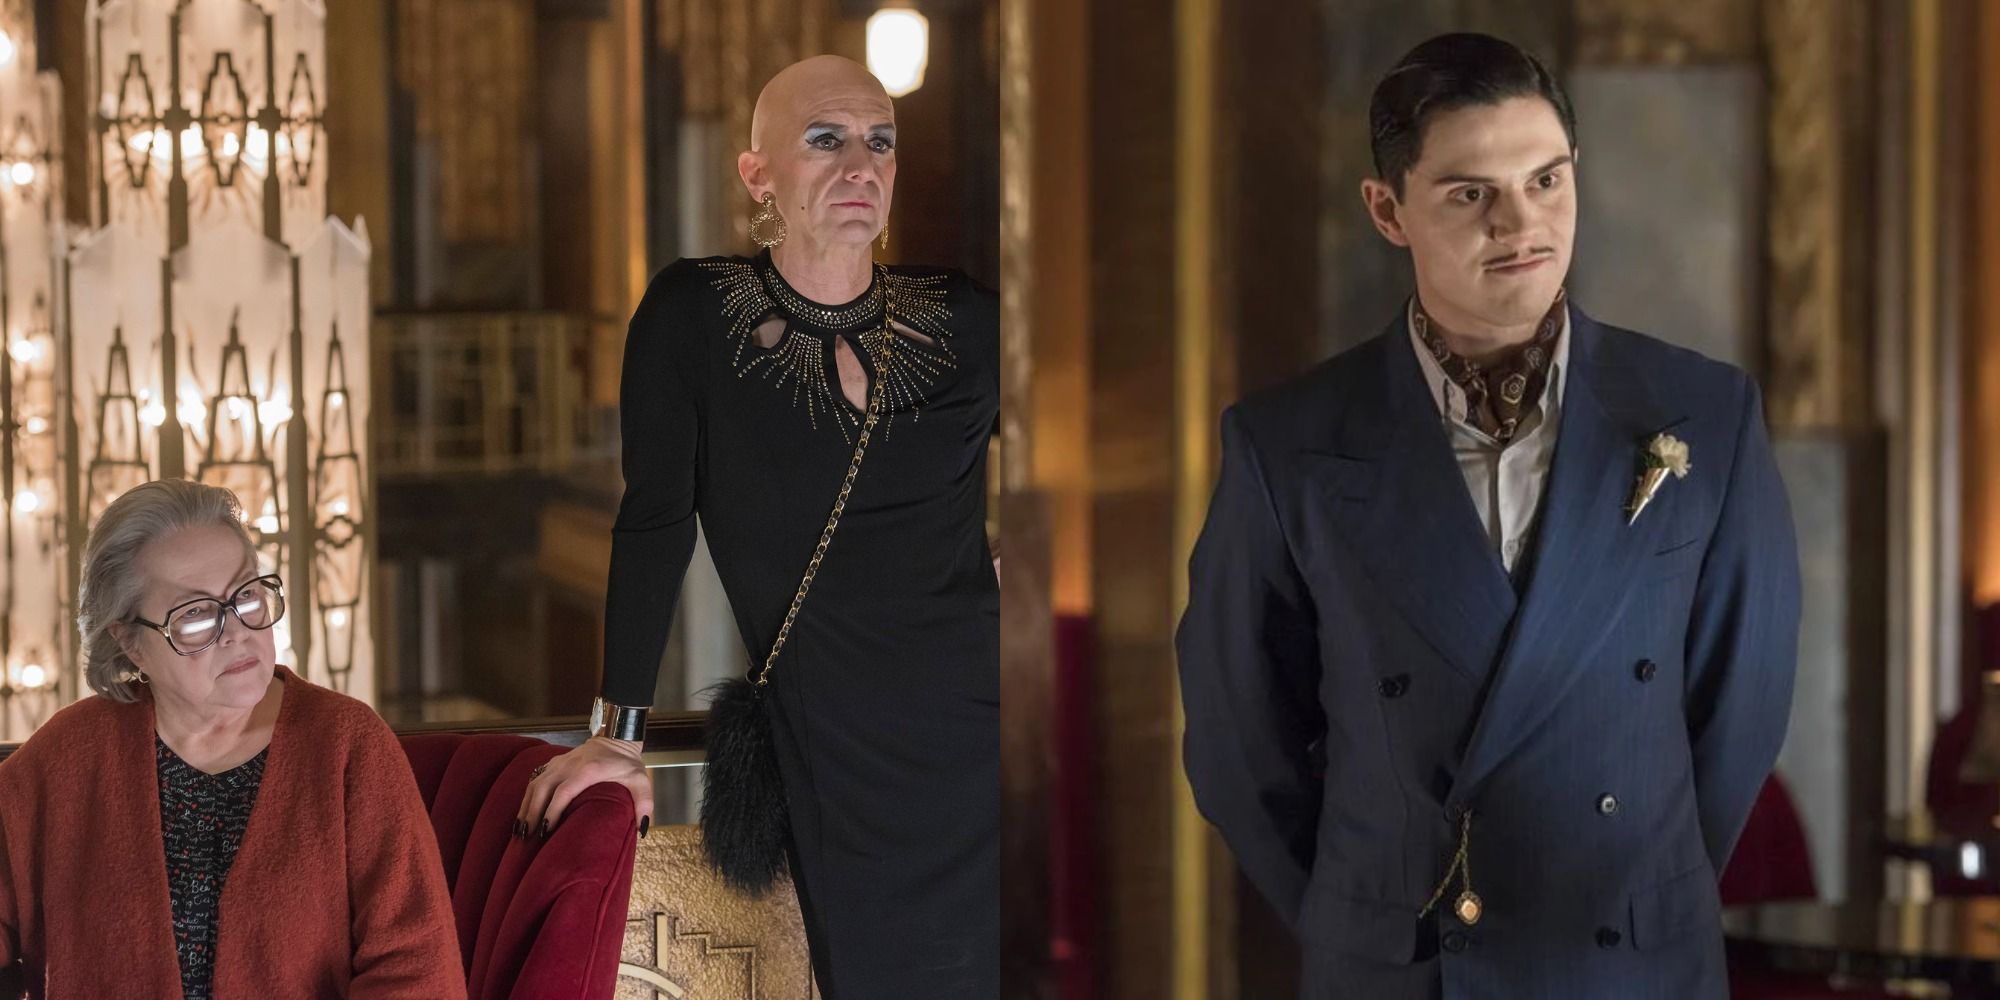 Split image showing Iris and Liz Taylor, and Mr. March in AHS Hotel